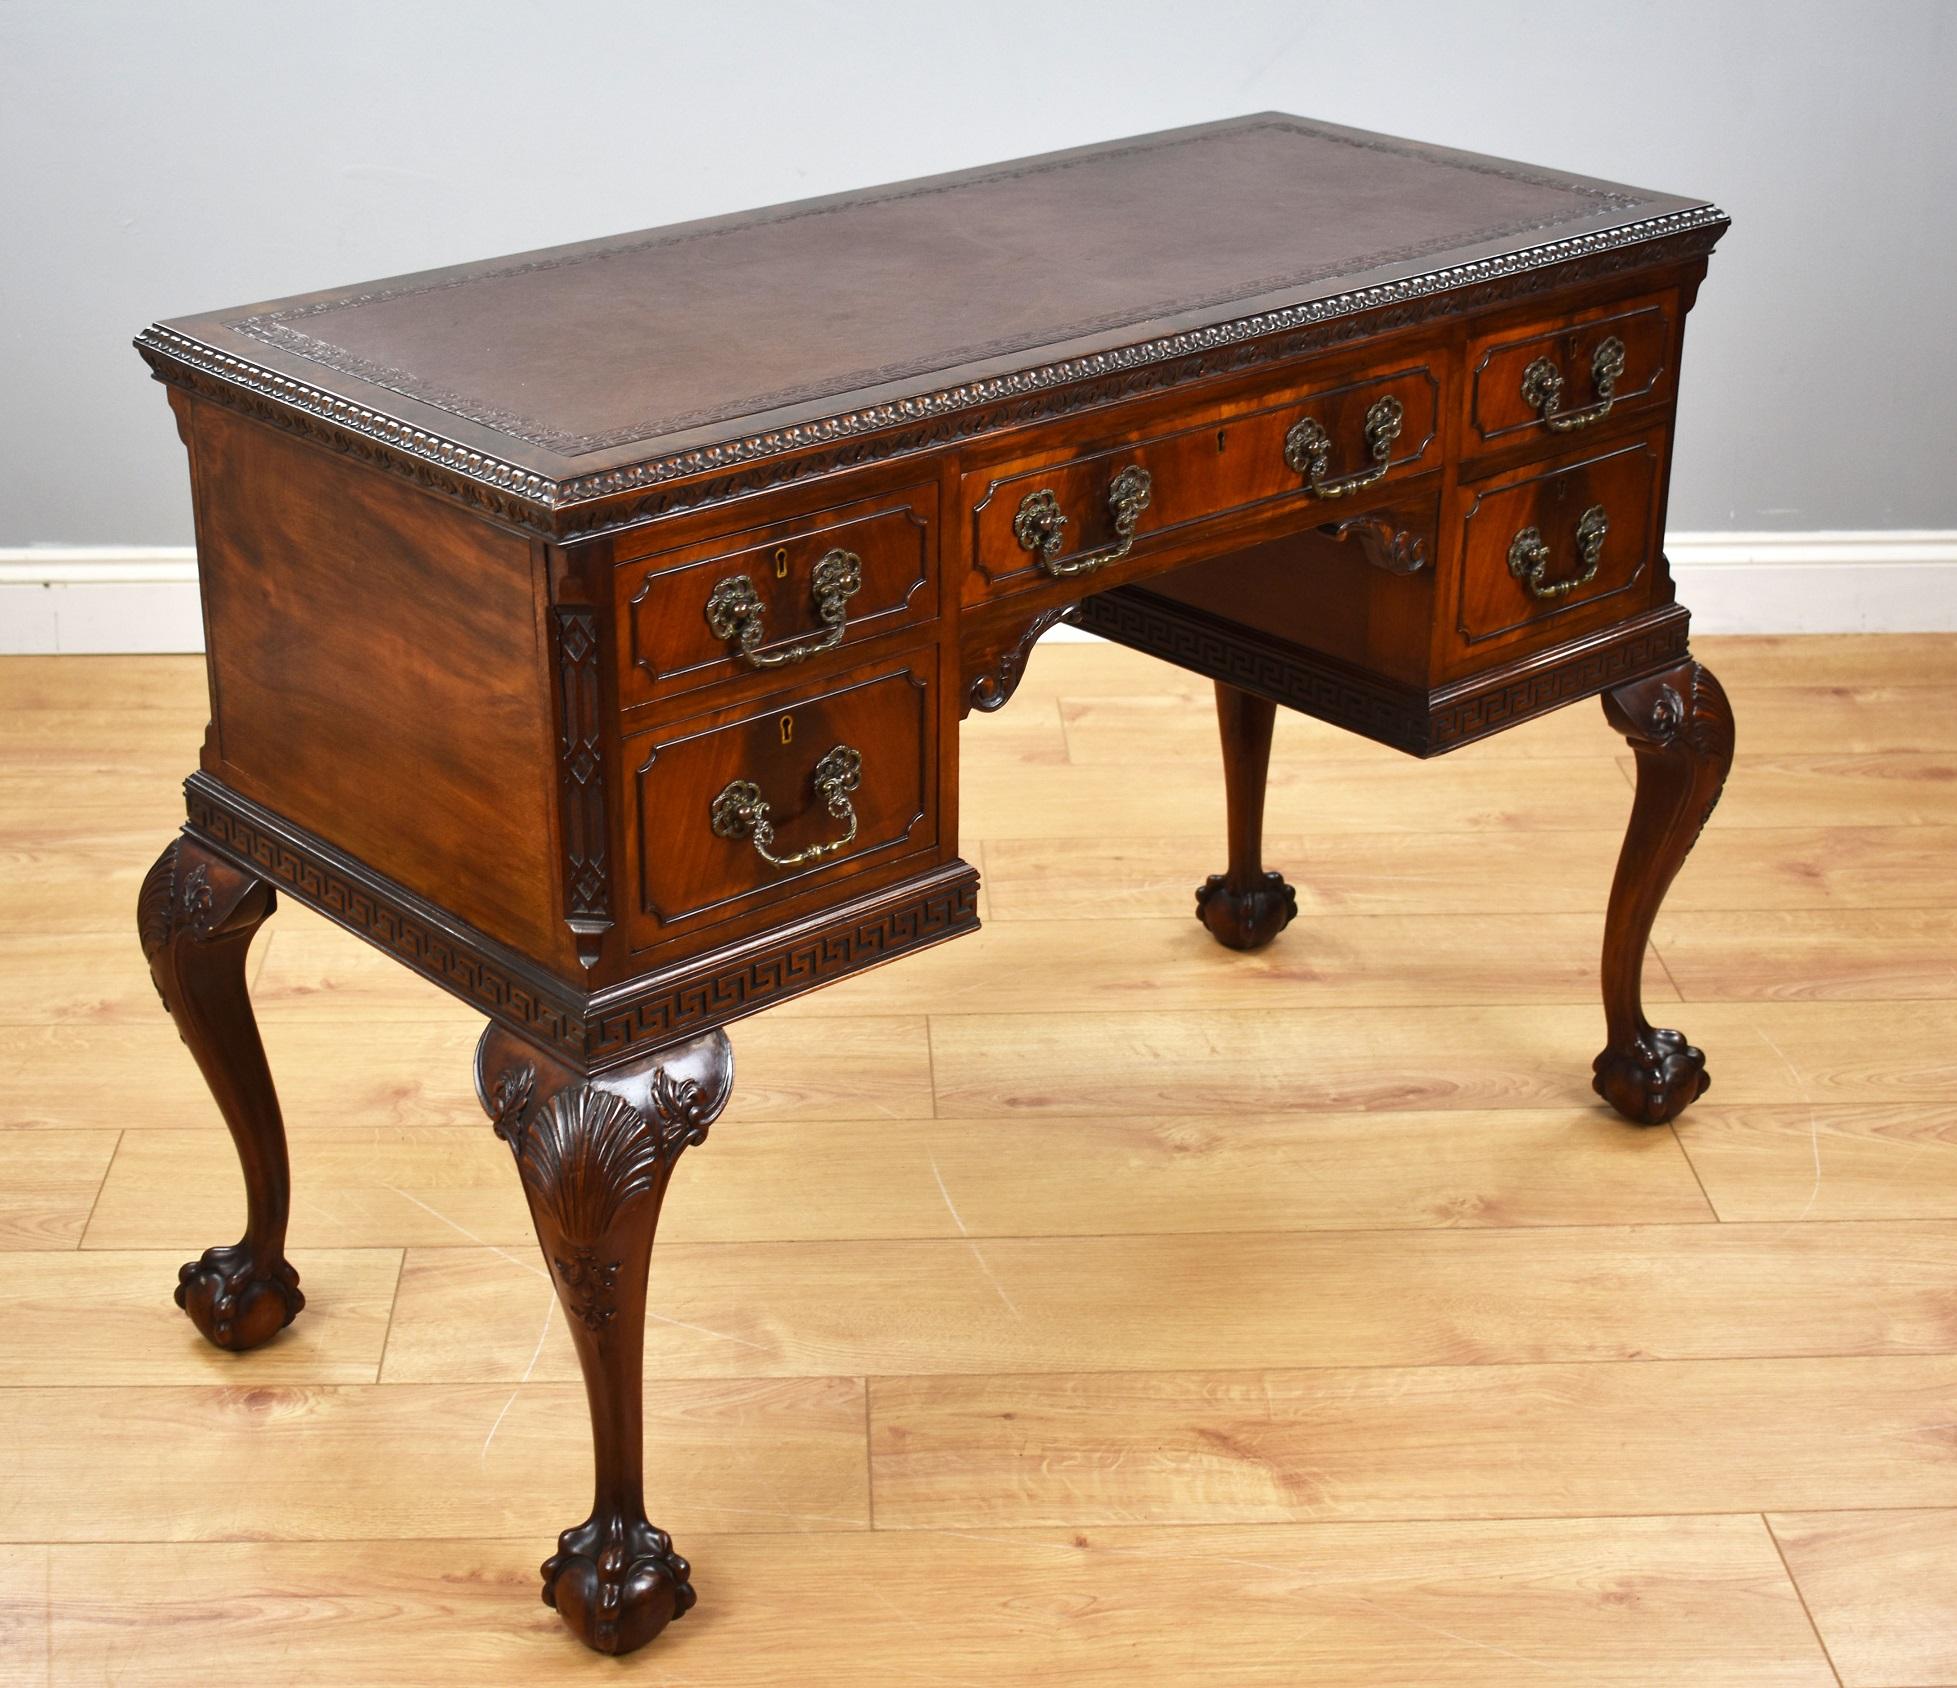 For sale is a fine quality antique Chippendale style mahogany writing table. The top is banded in superb flame mahogany veneer surrounding the inset writing surface, the edge decorated with fine carved mouldings. Below this there is an arrangement